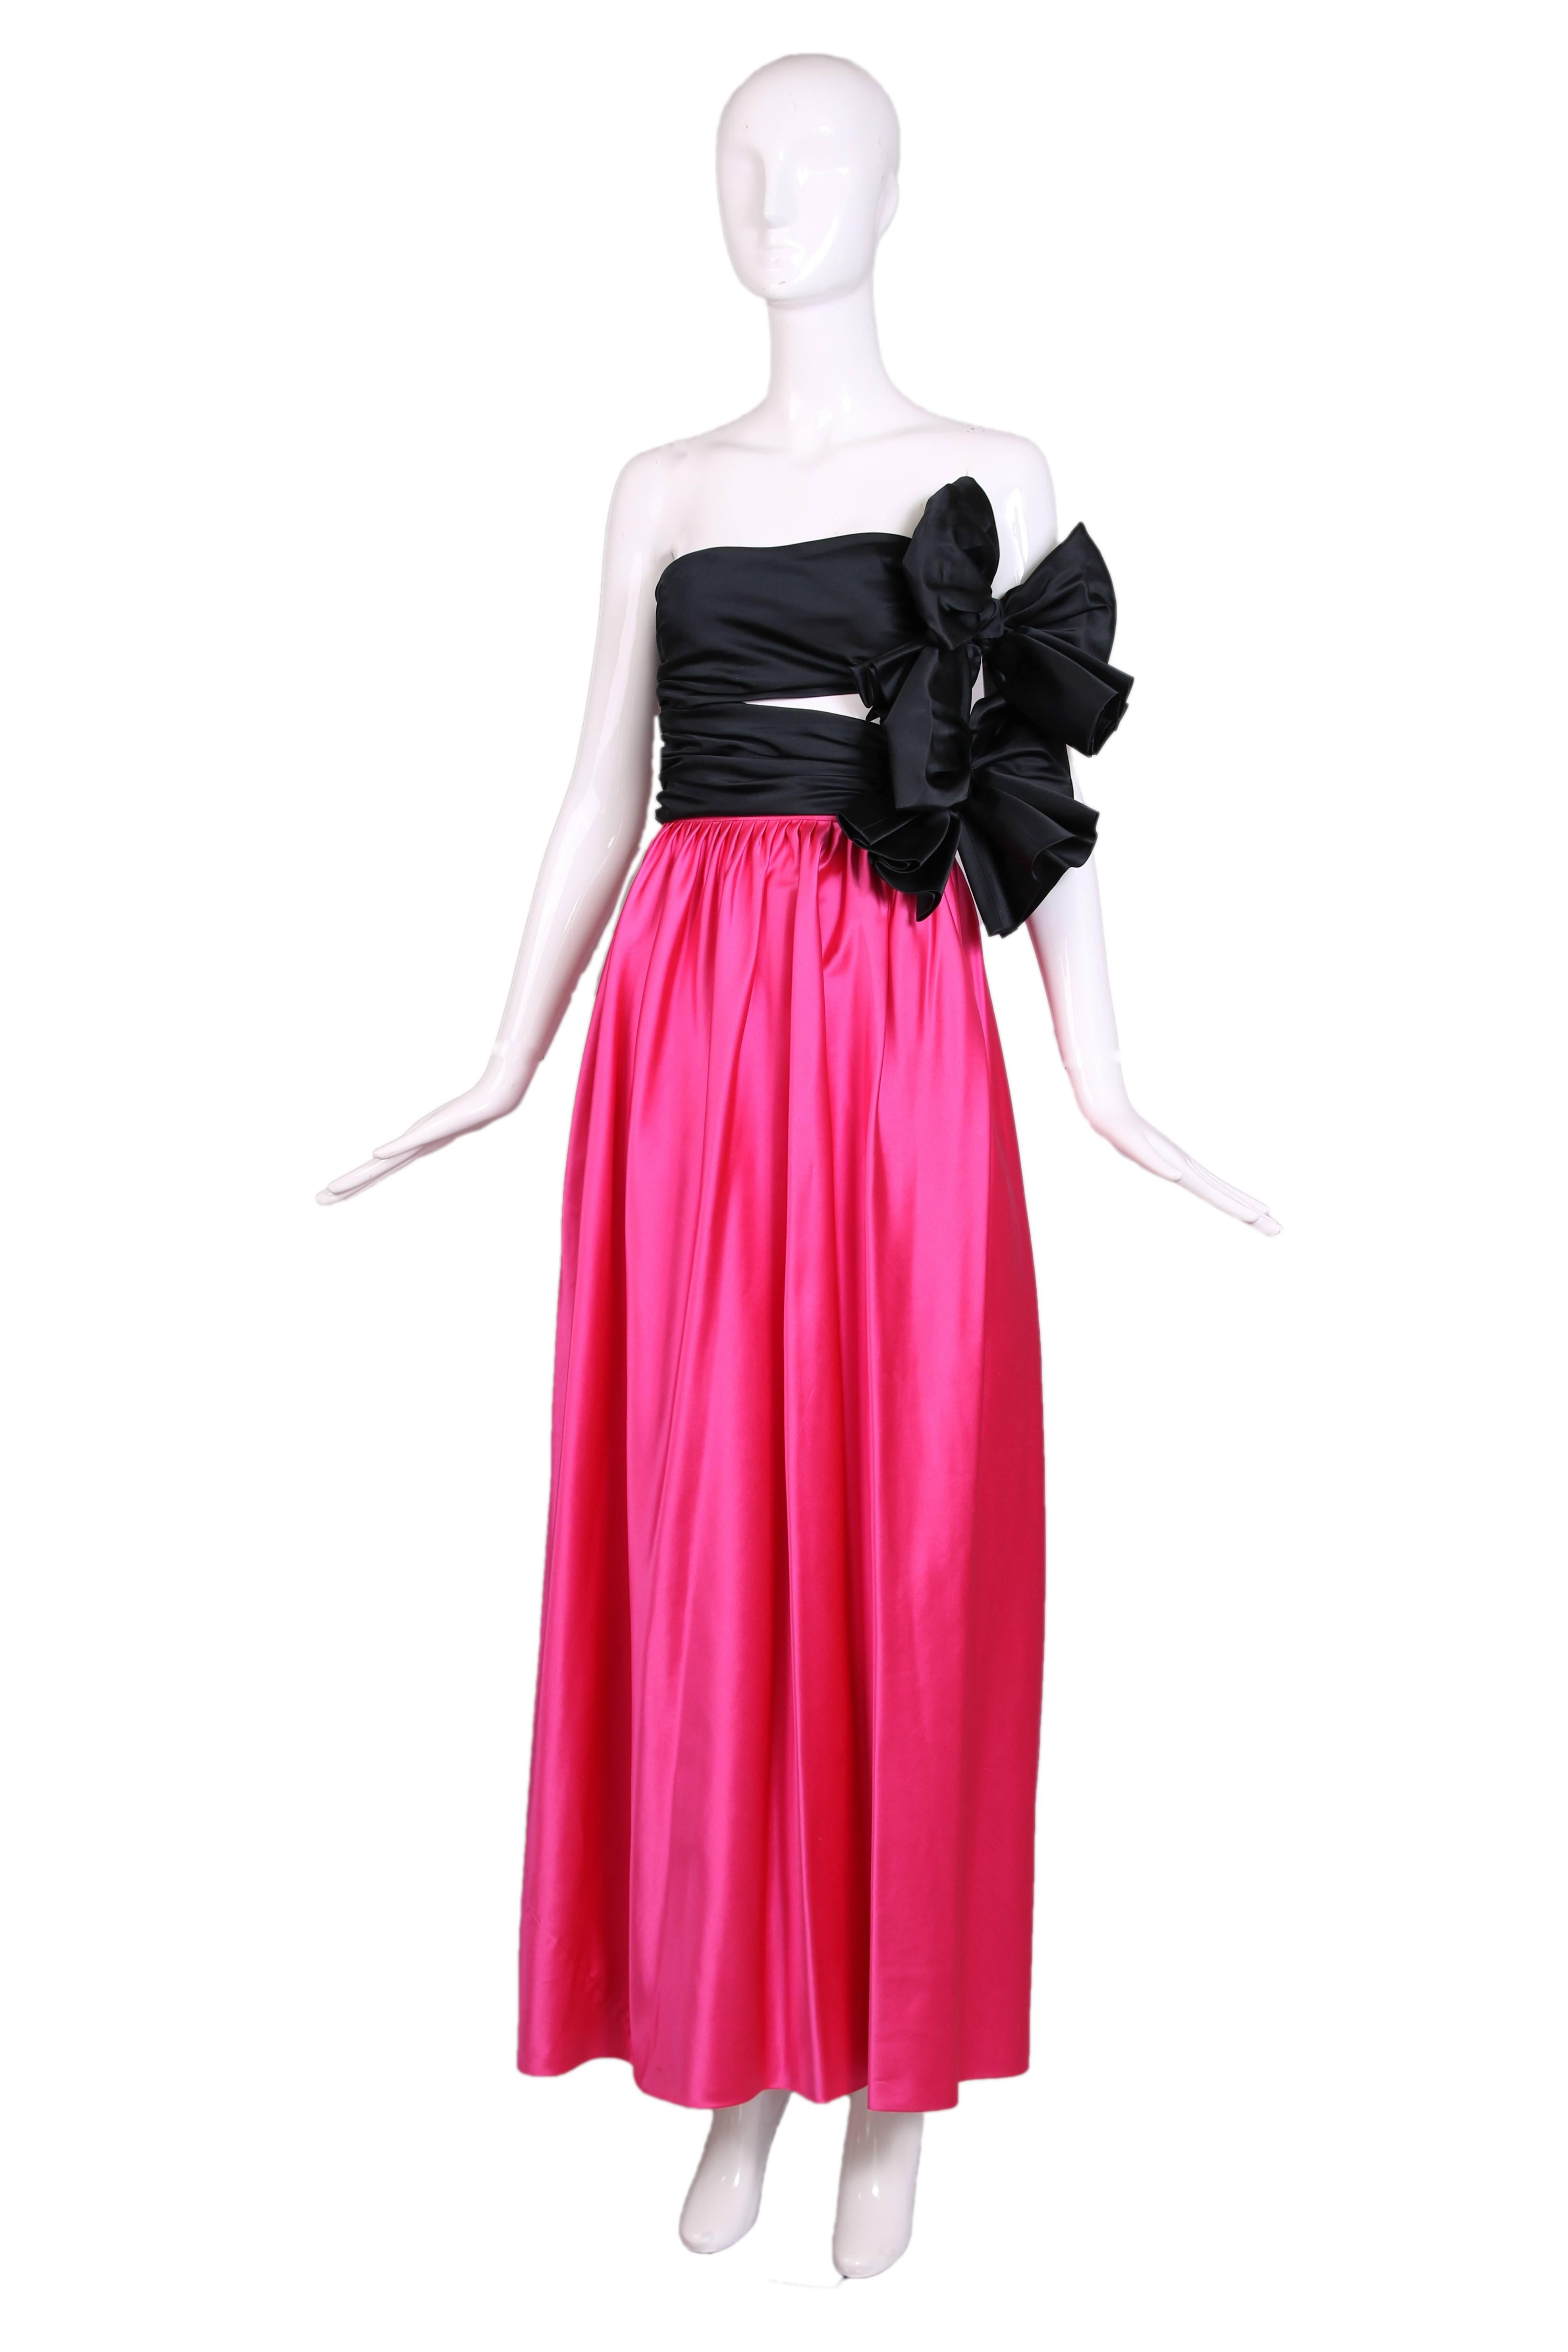 A 1979 Lanvin haute couture strapless evening gown comprised of a shocking pink satin floor length skirt and a  black satin bodice made from two horizontal ruched bands which fasten at the side and feature two dramatic oversized bows. The skirt is